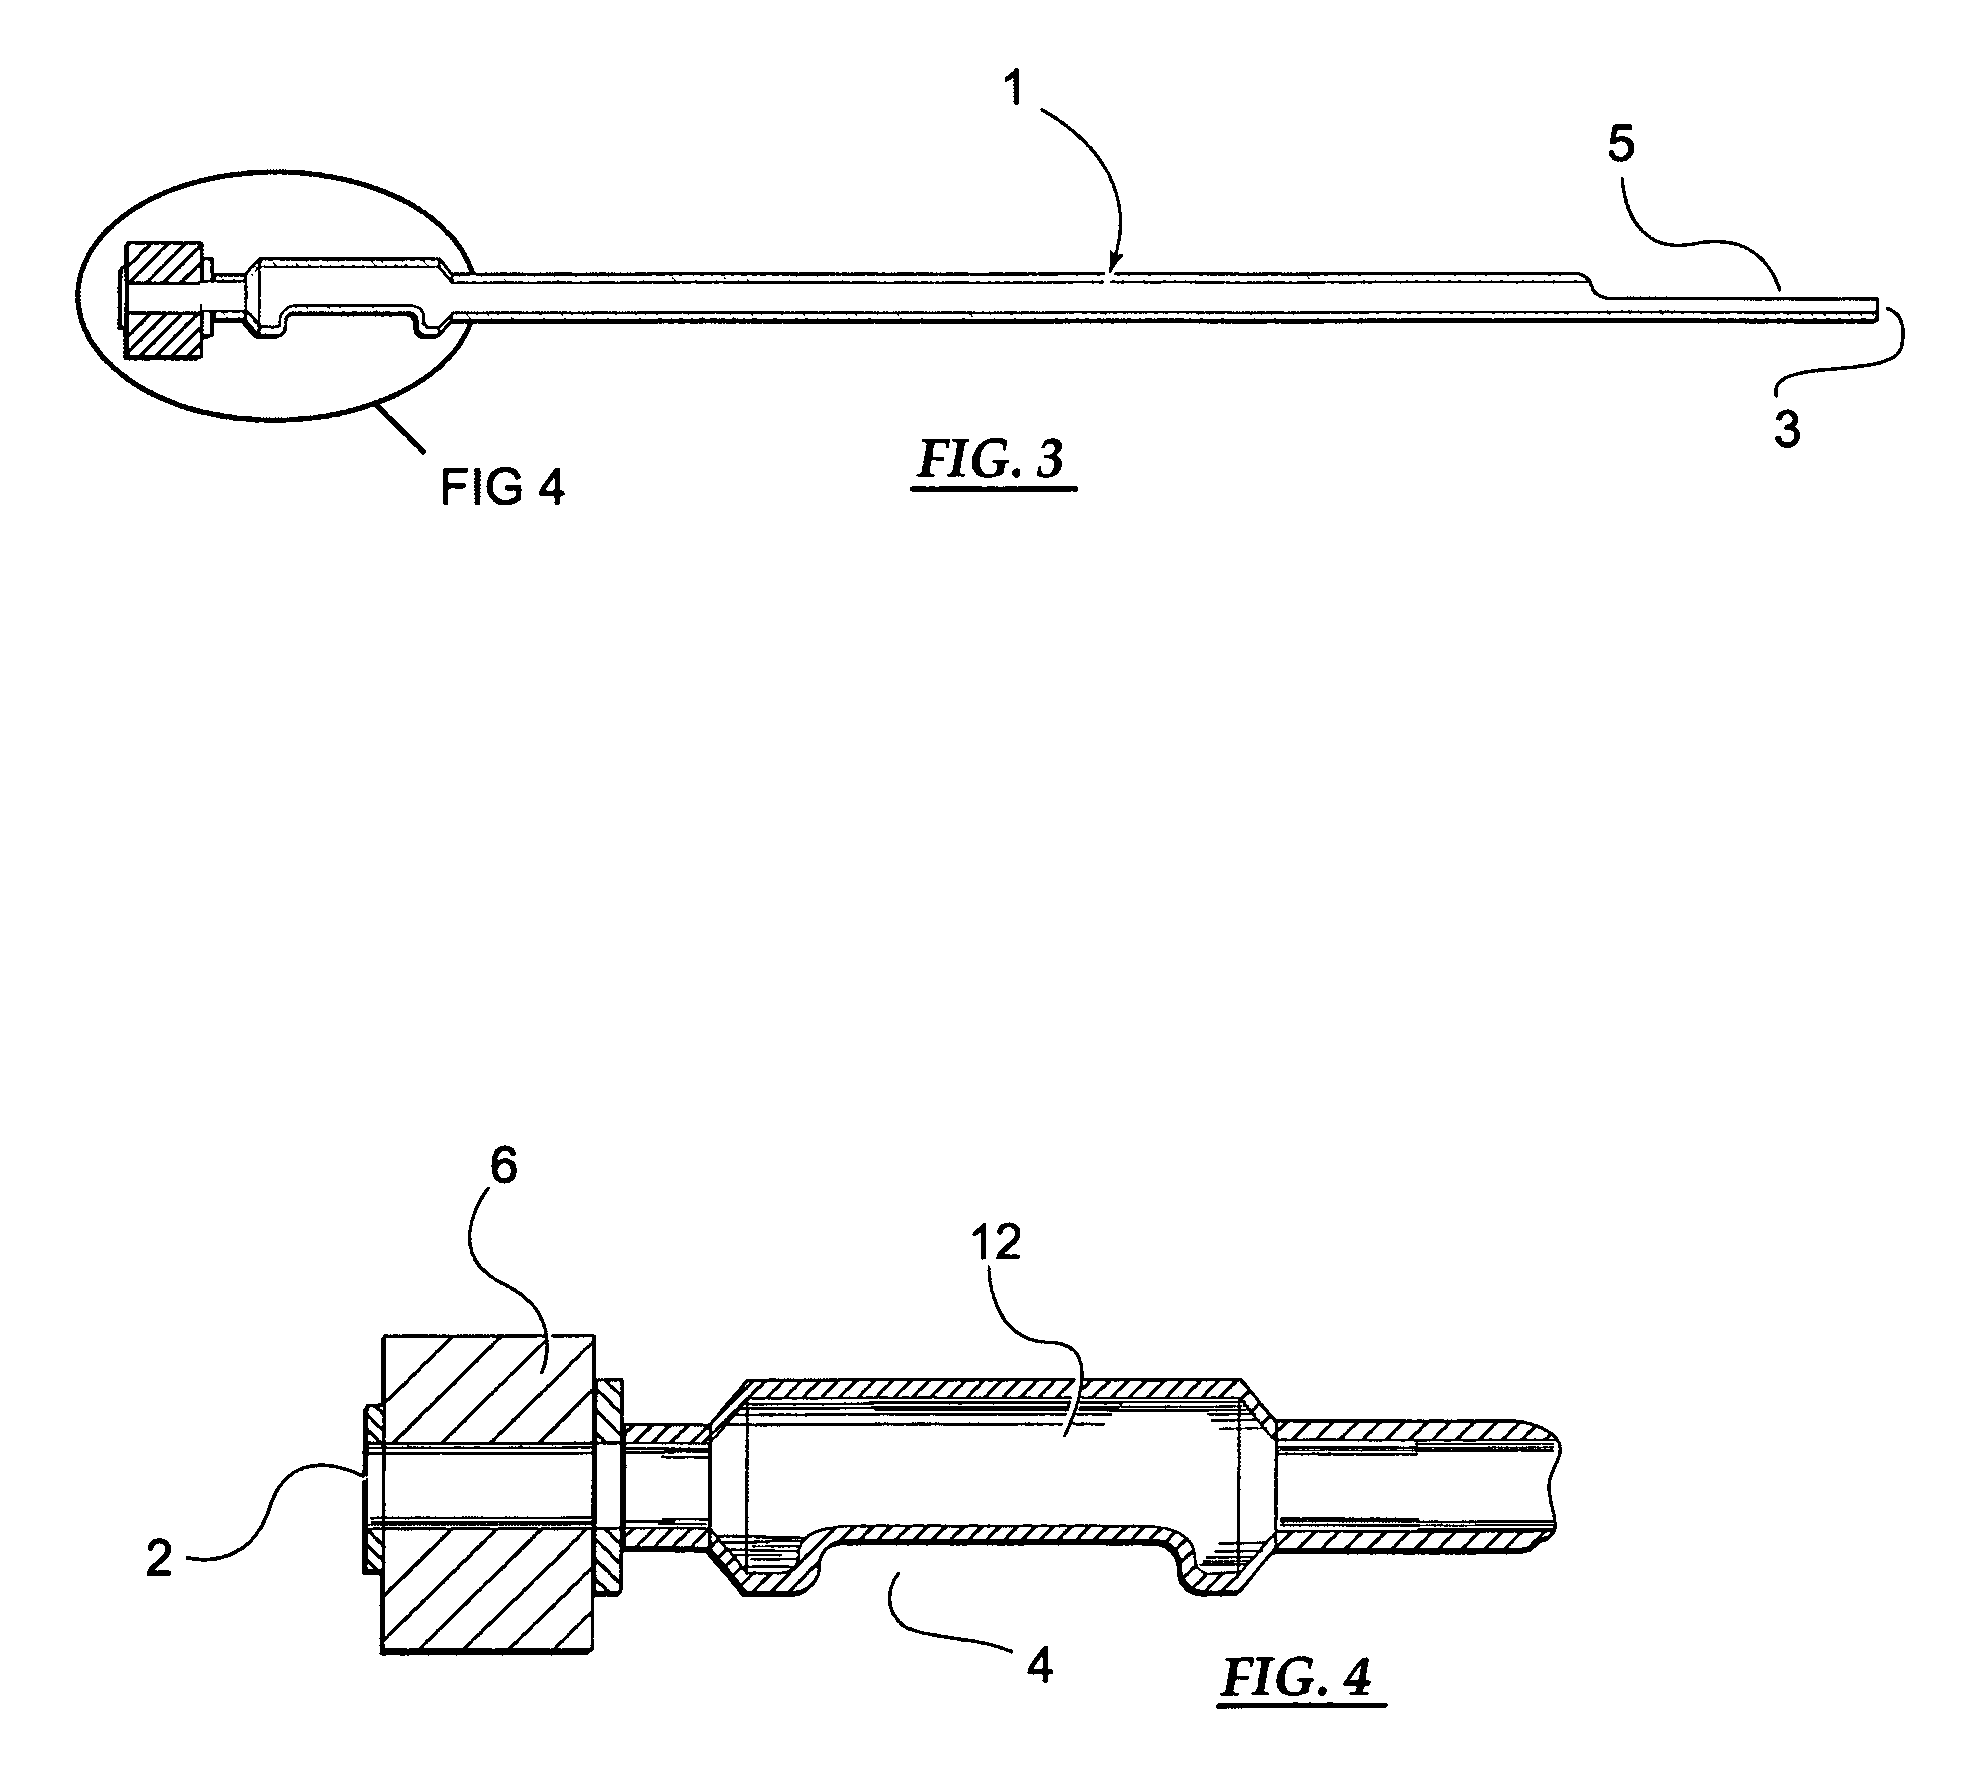 Device and method for introducing flowable material into a body cavity